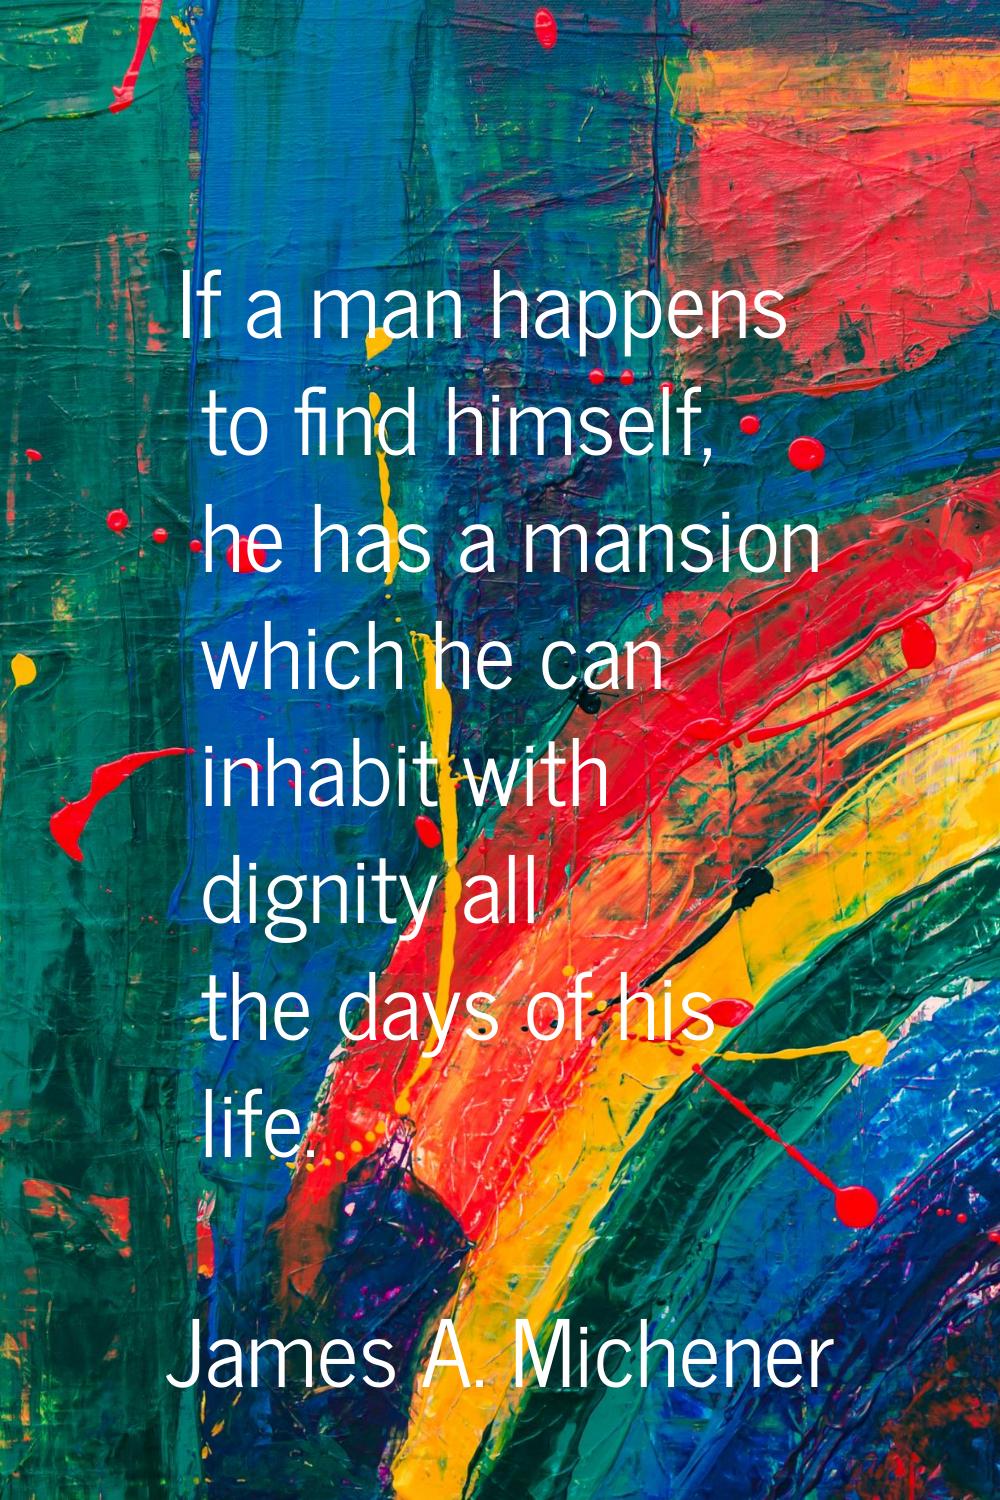 If a man happens to find himself, he has a mansion which he can inhabit with dignity all the days o